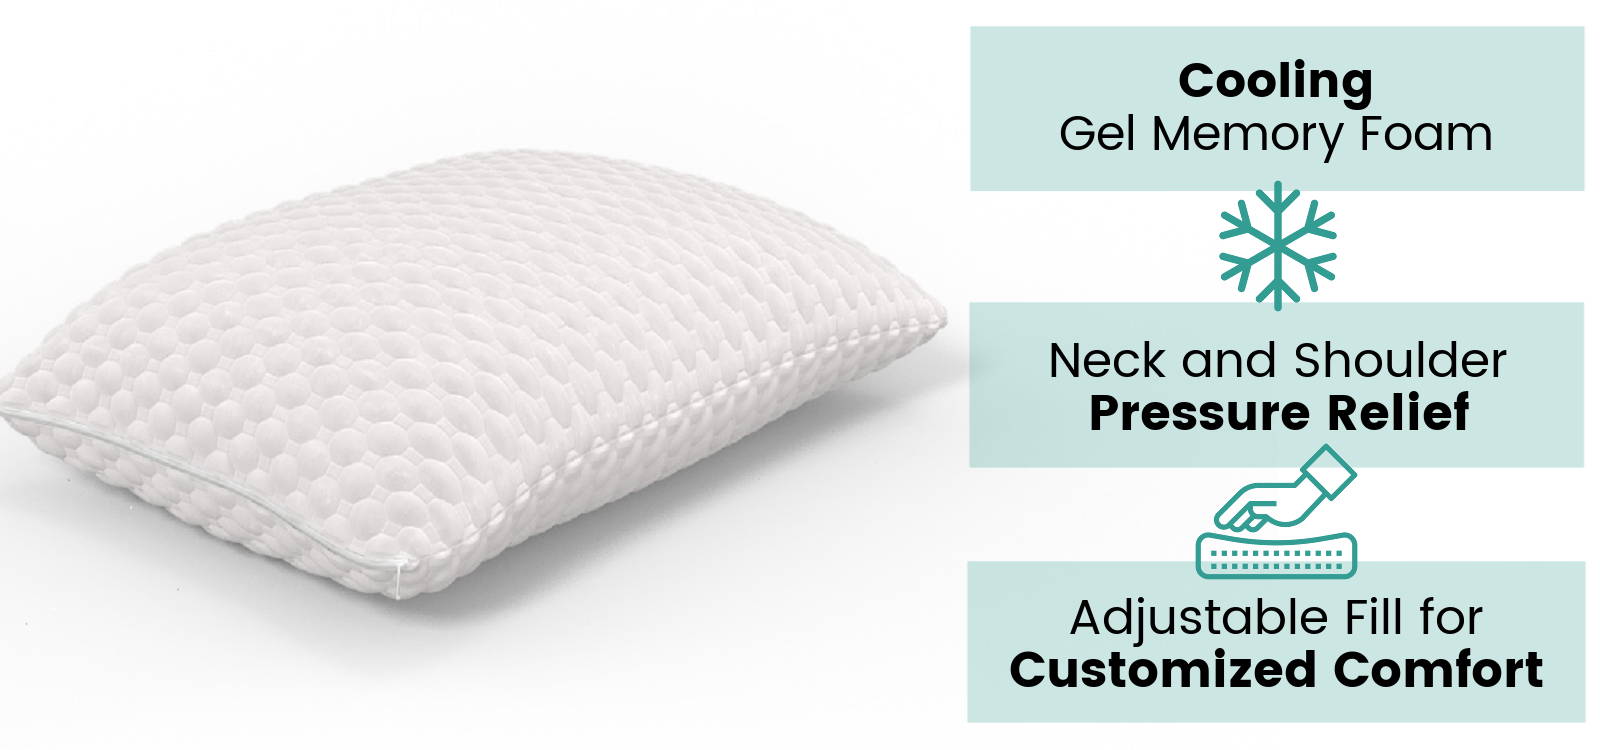 CBD infused pillow on a white background that has cooling gel memory foam, gives neck and shoulder pressure relief, and is customizable with adjustable fill for comfort.